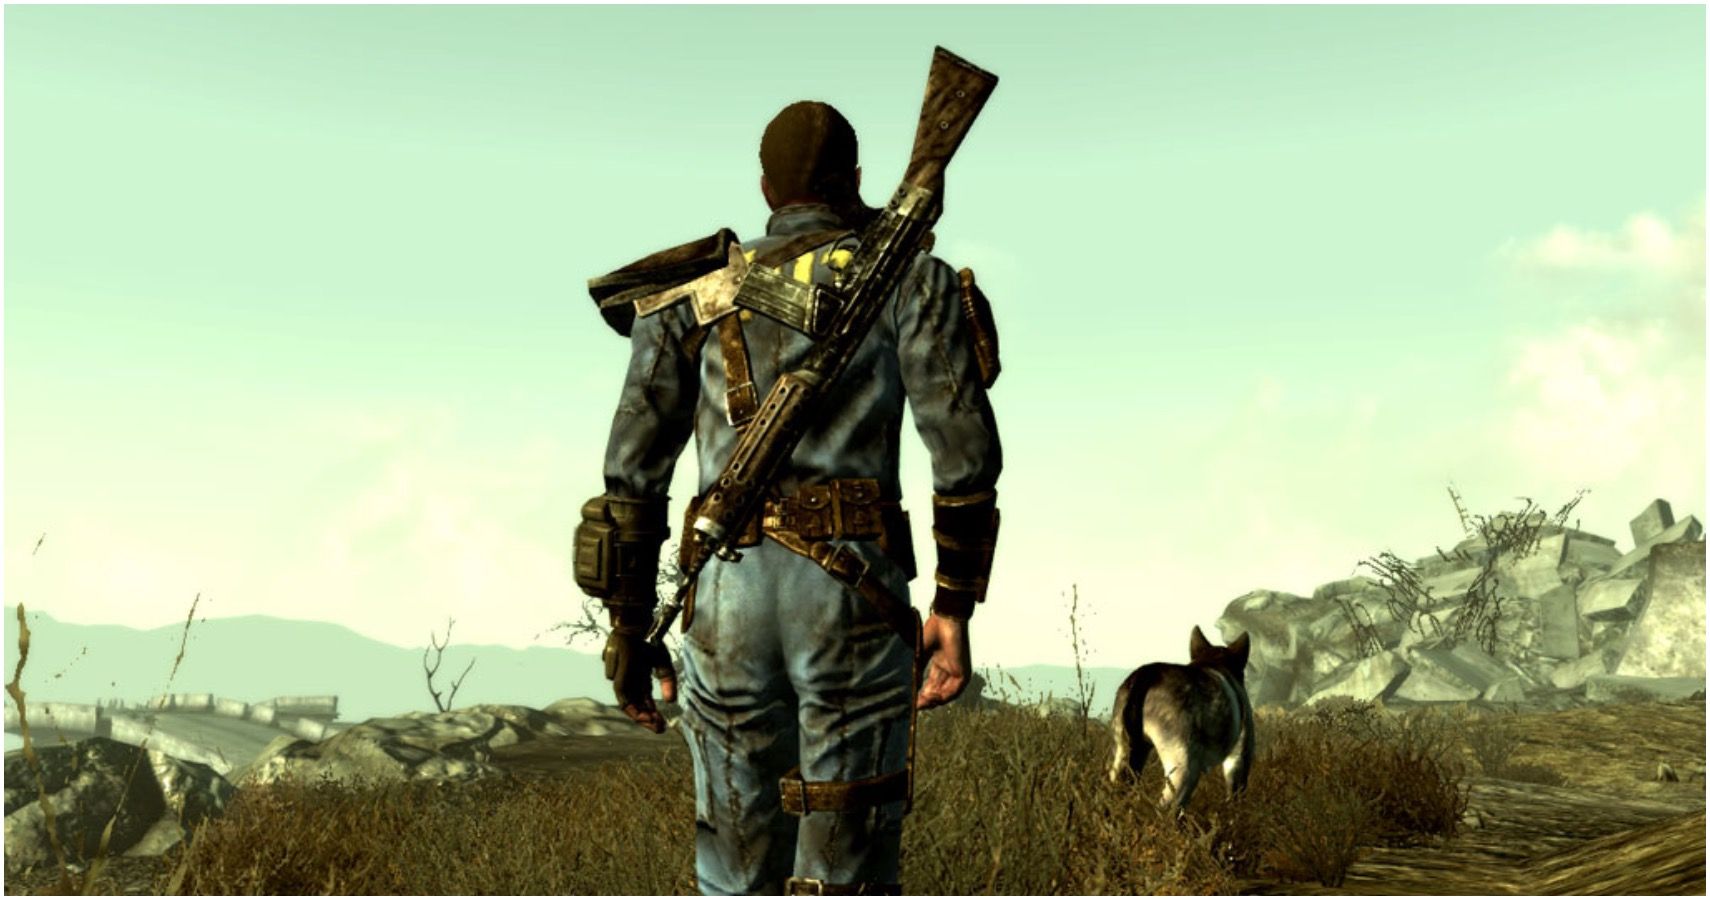 Fallout 3: 10 Things You Didn't Know About The Lone Wanderer